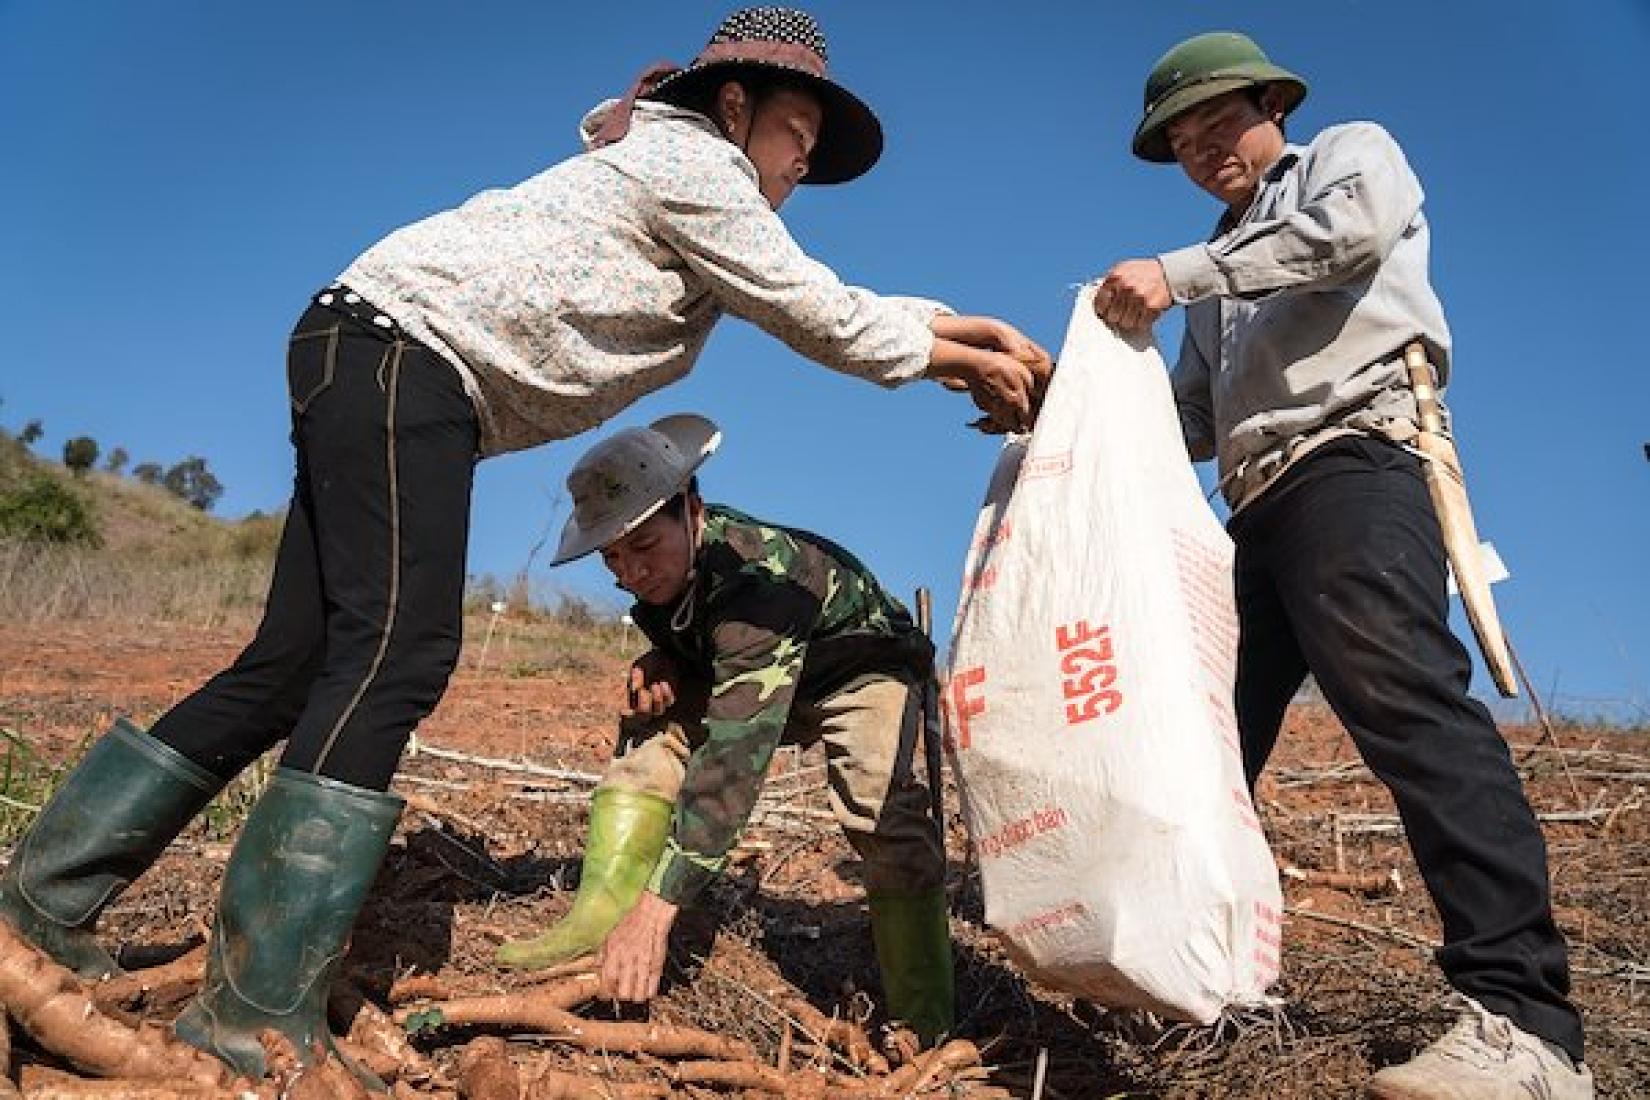 Luong Van Non (middle) and his wife, Lo Thi Nuong (left), harvesting cassava.